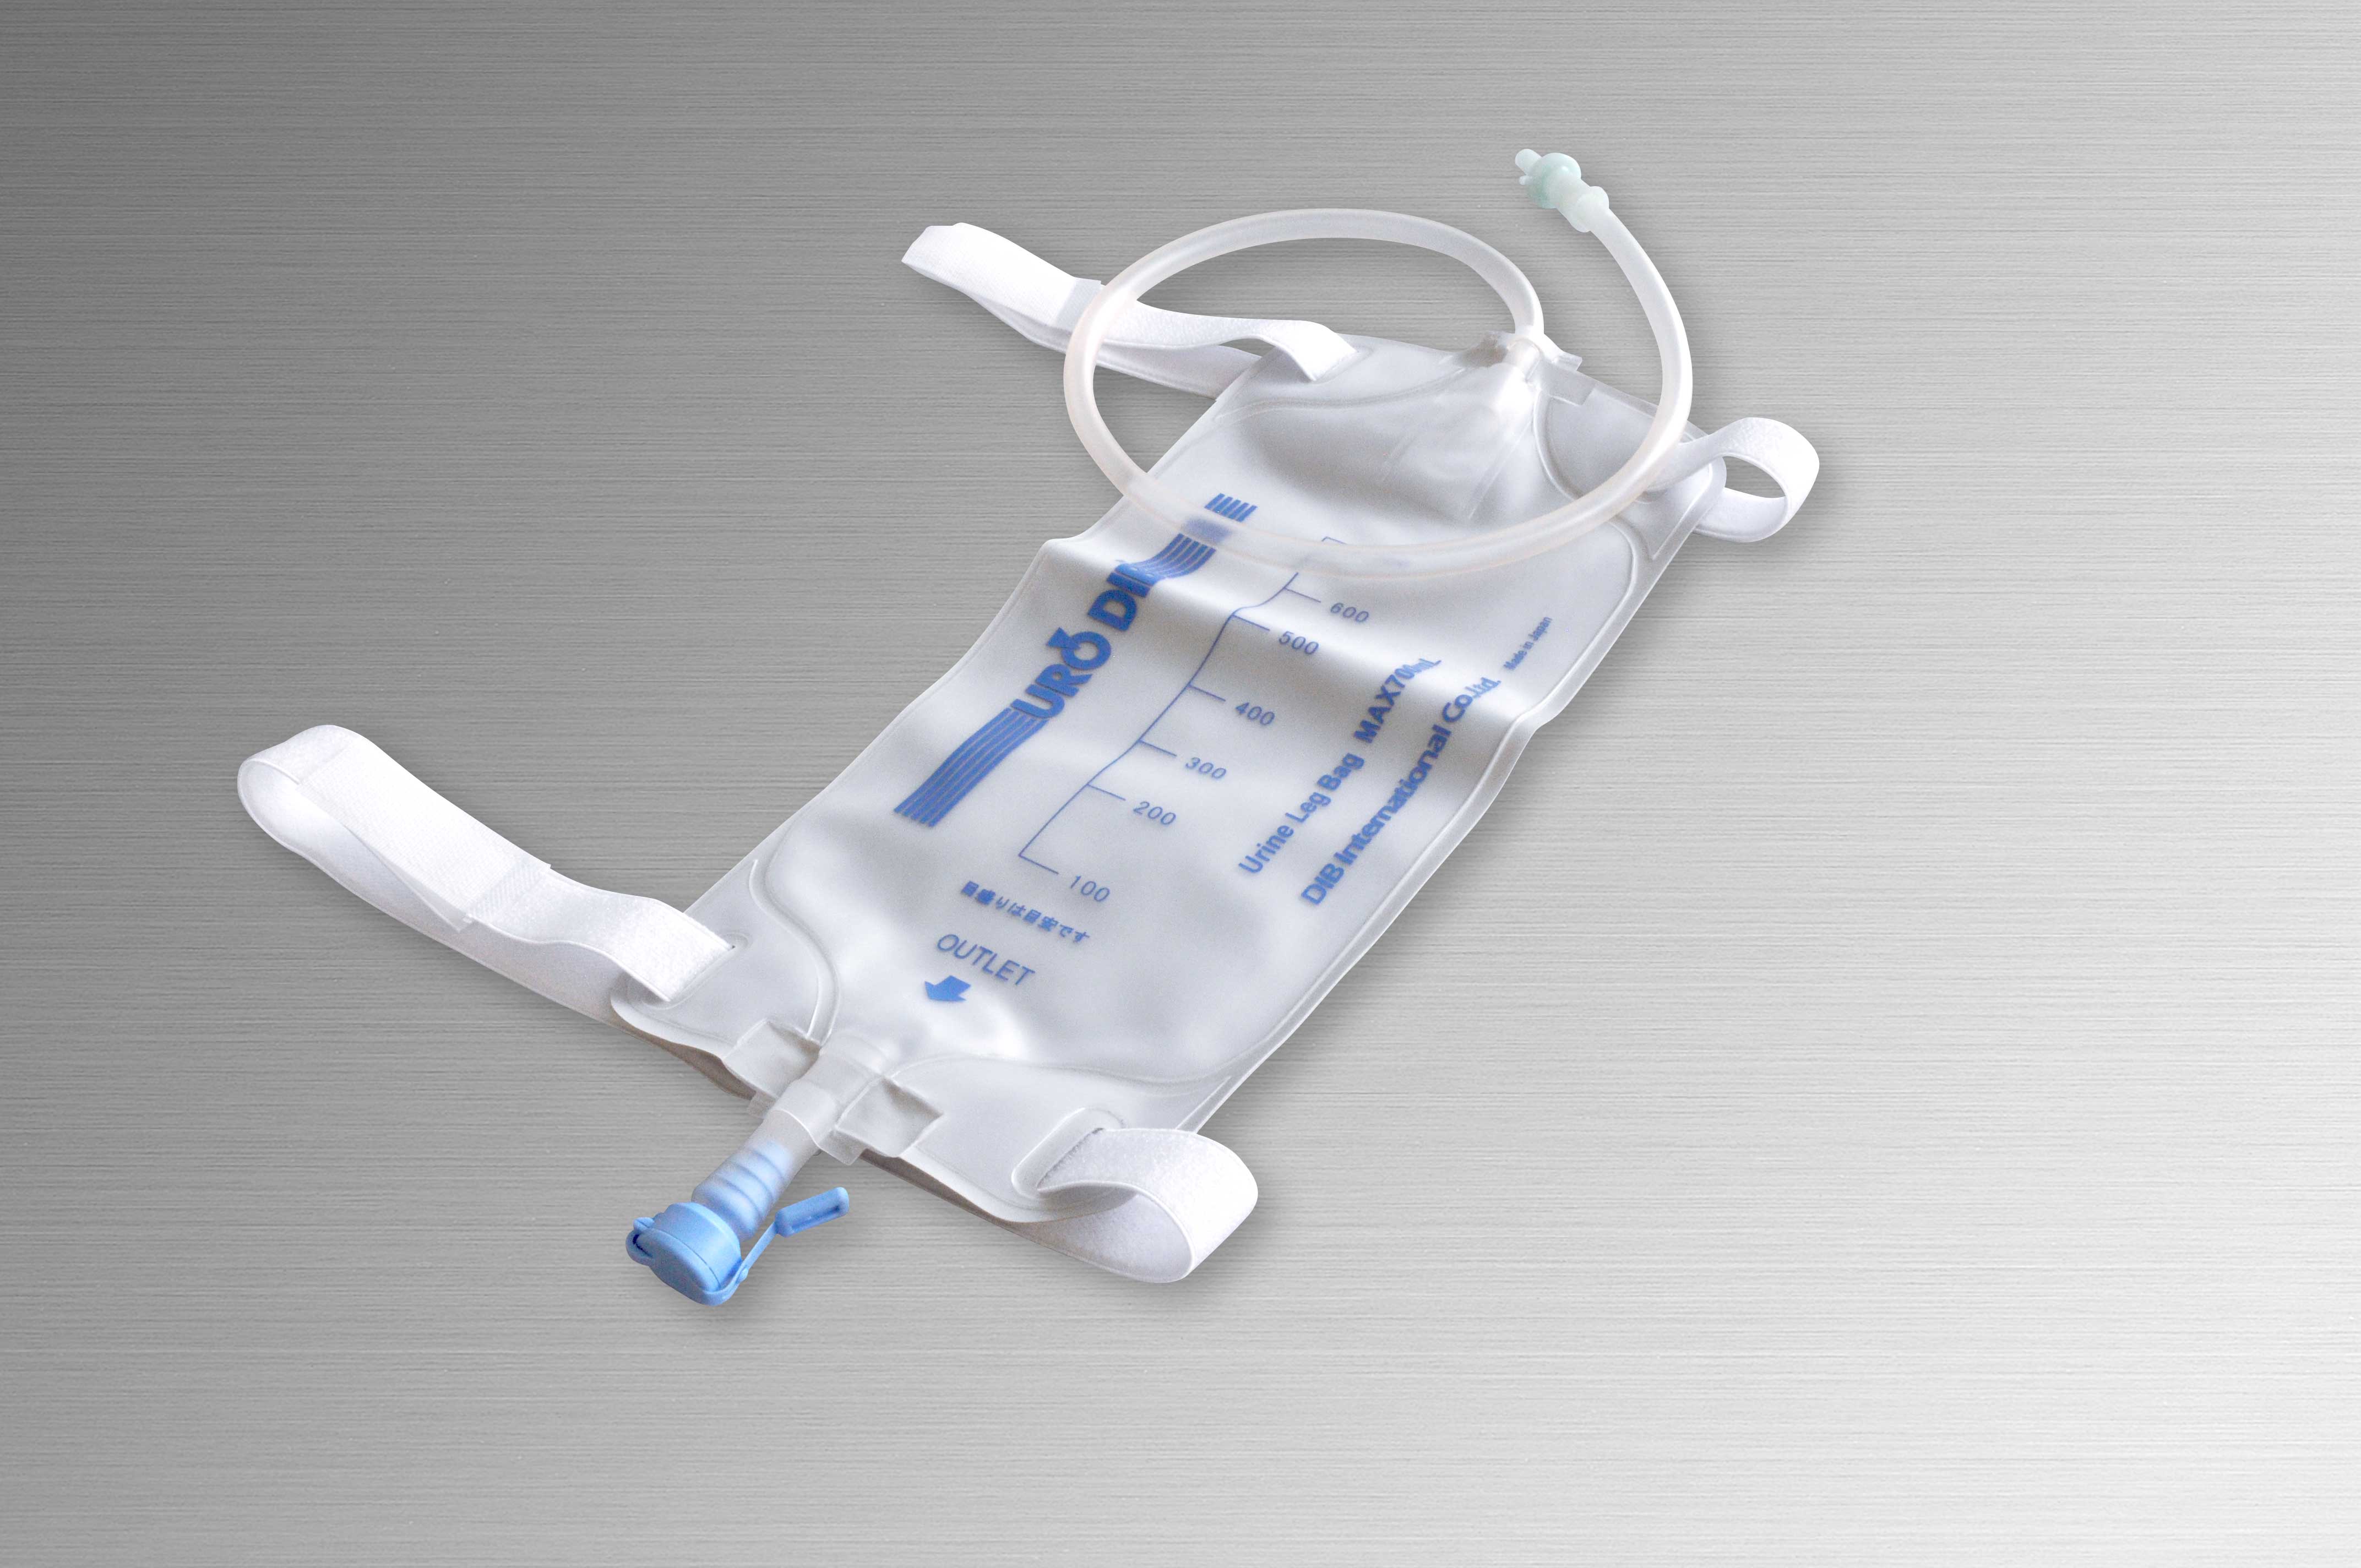 Buy Dover Disposable Urine Leg Bag with Fabric Straps at Medical Monks!